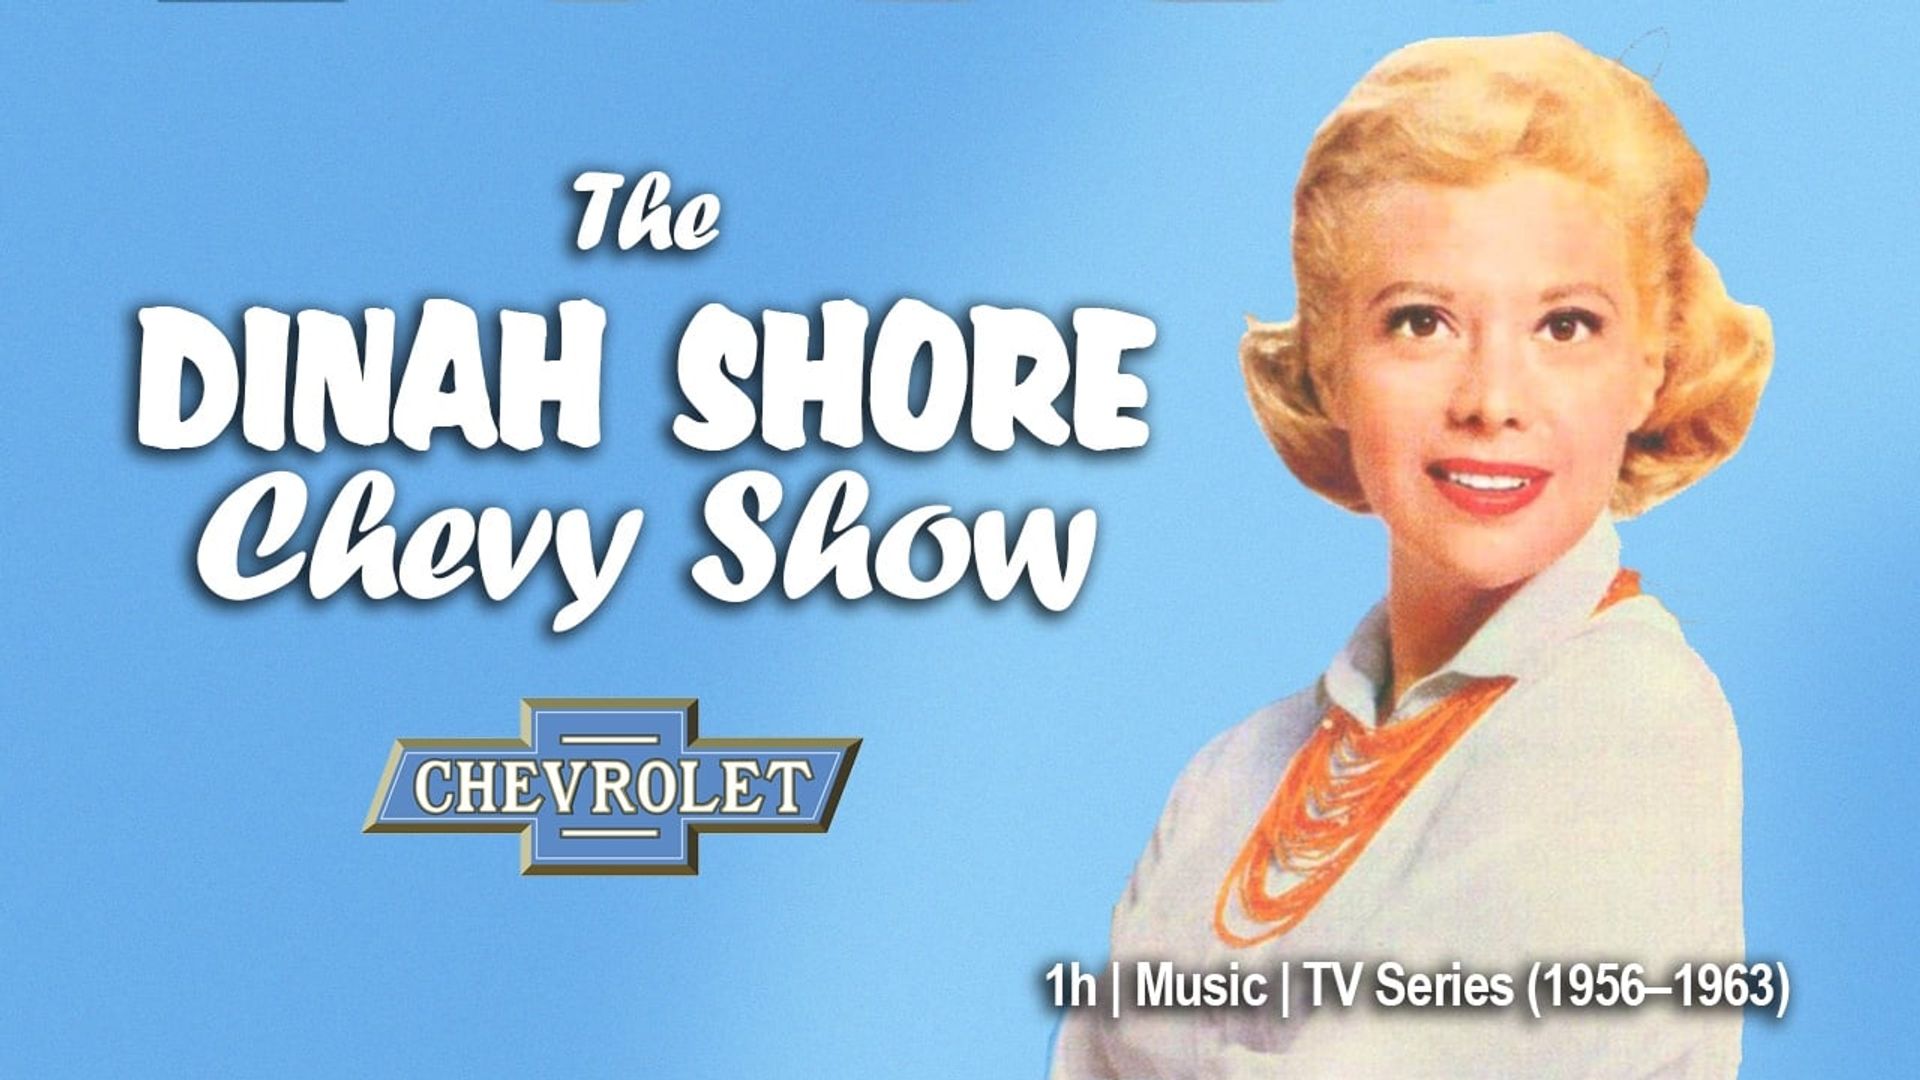 The Dinah Shore Chevy Show background